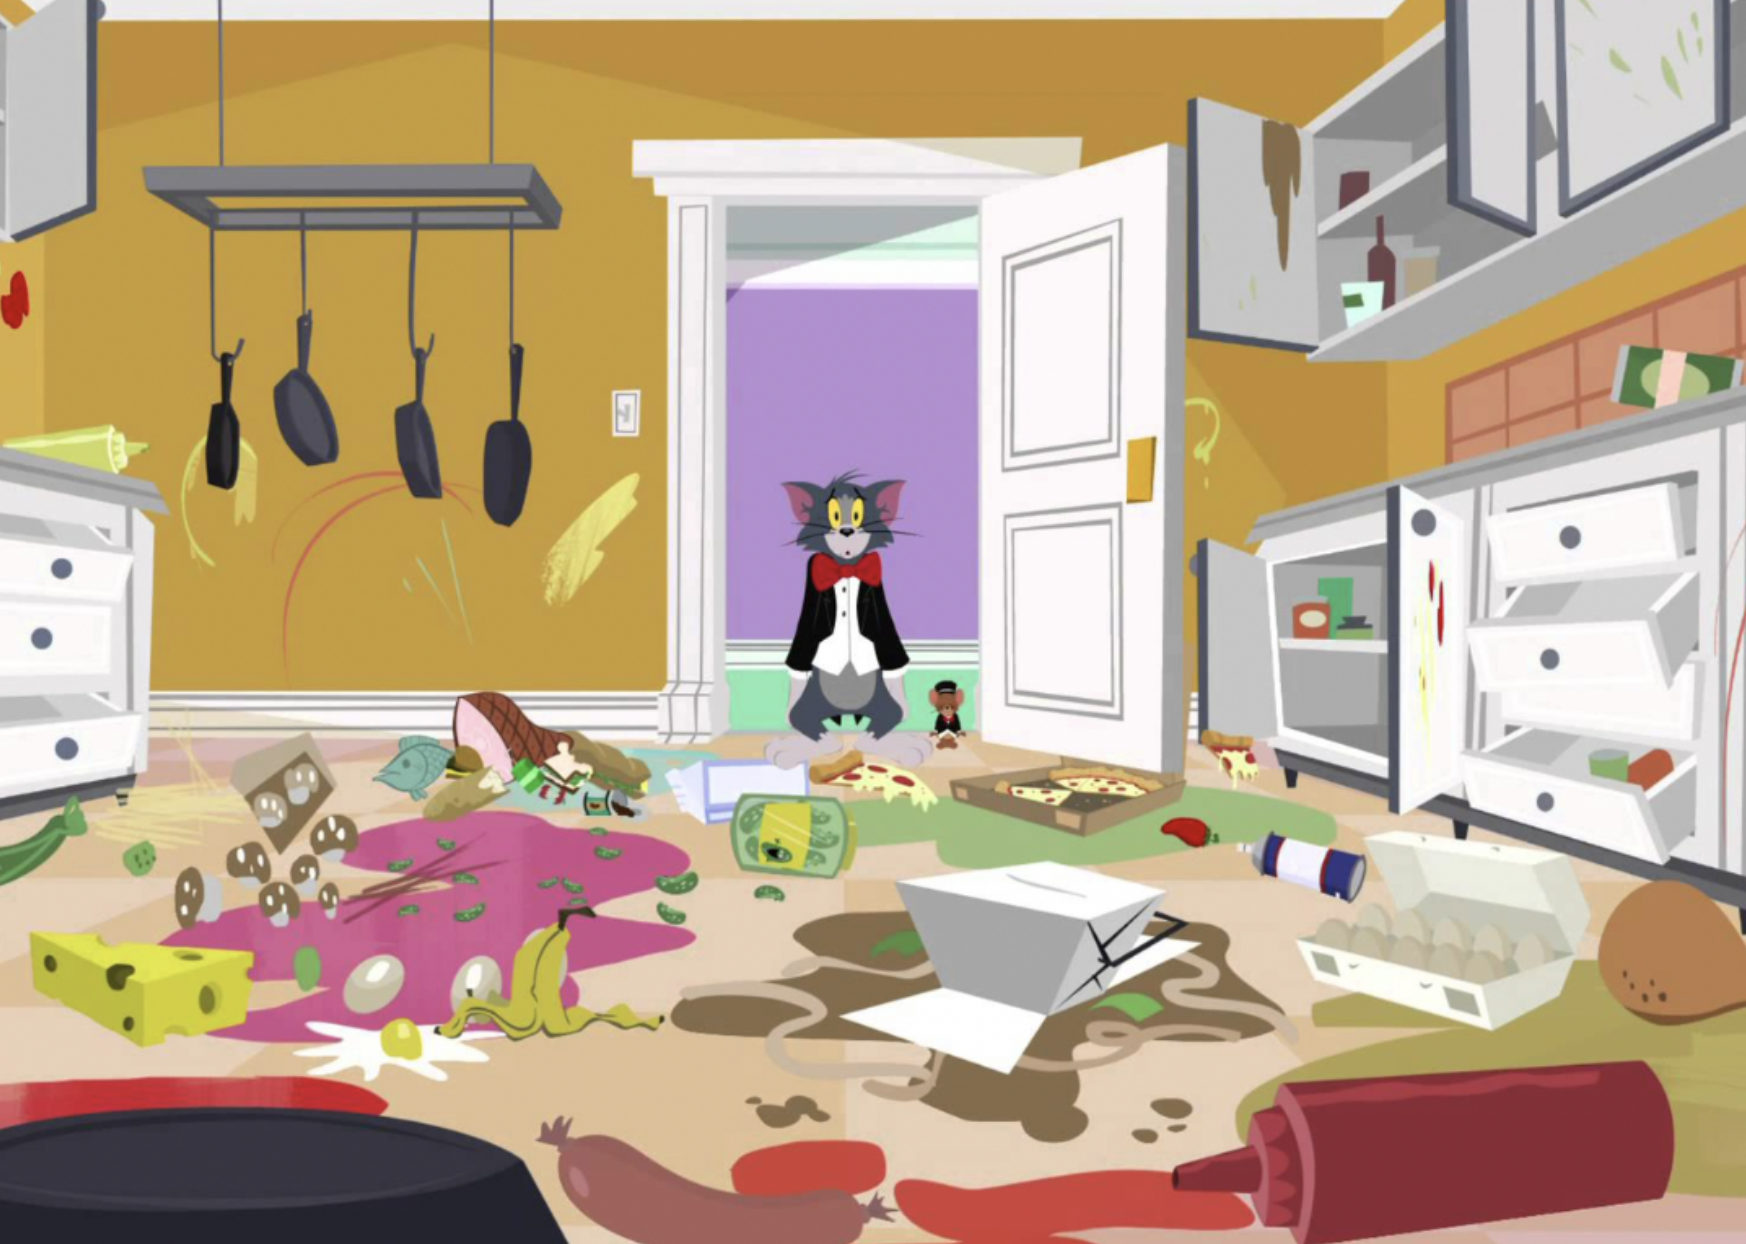 Tom and Jerry staring at an extremely messy kitchen in The Tom and Jerry Show